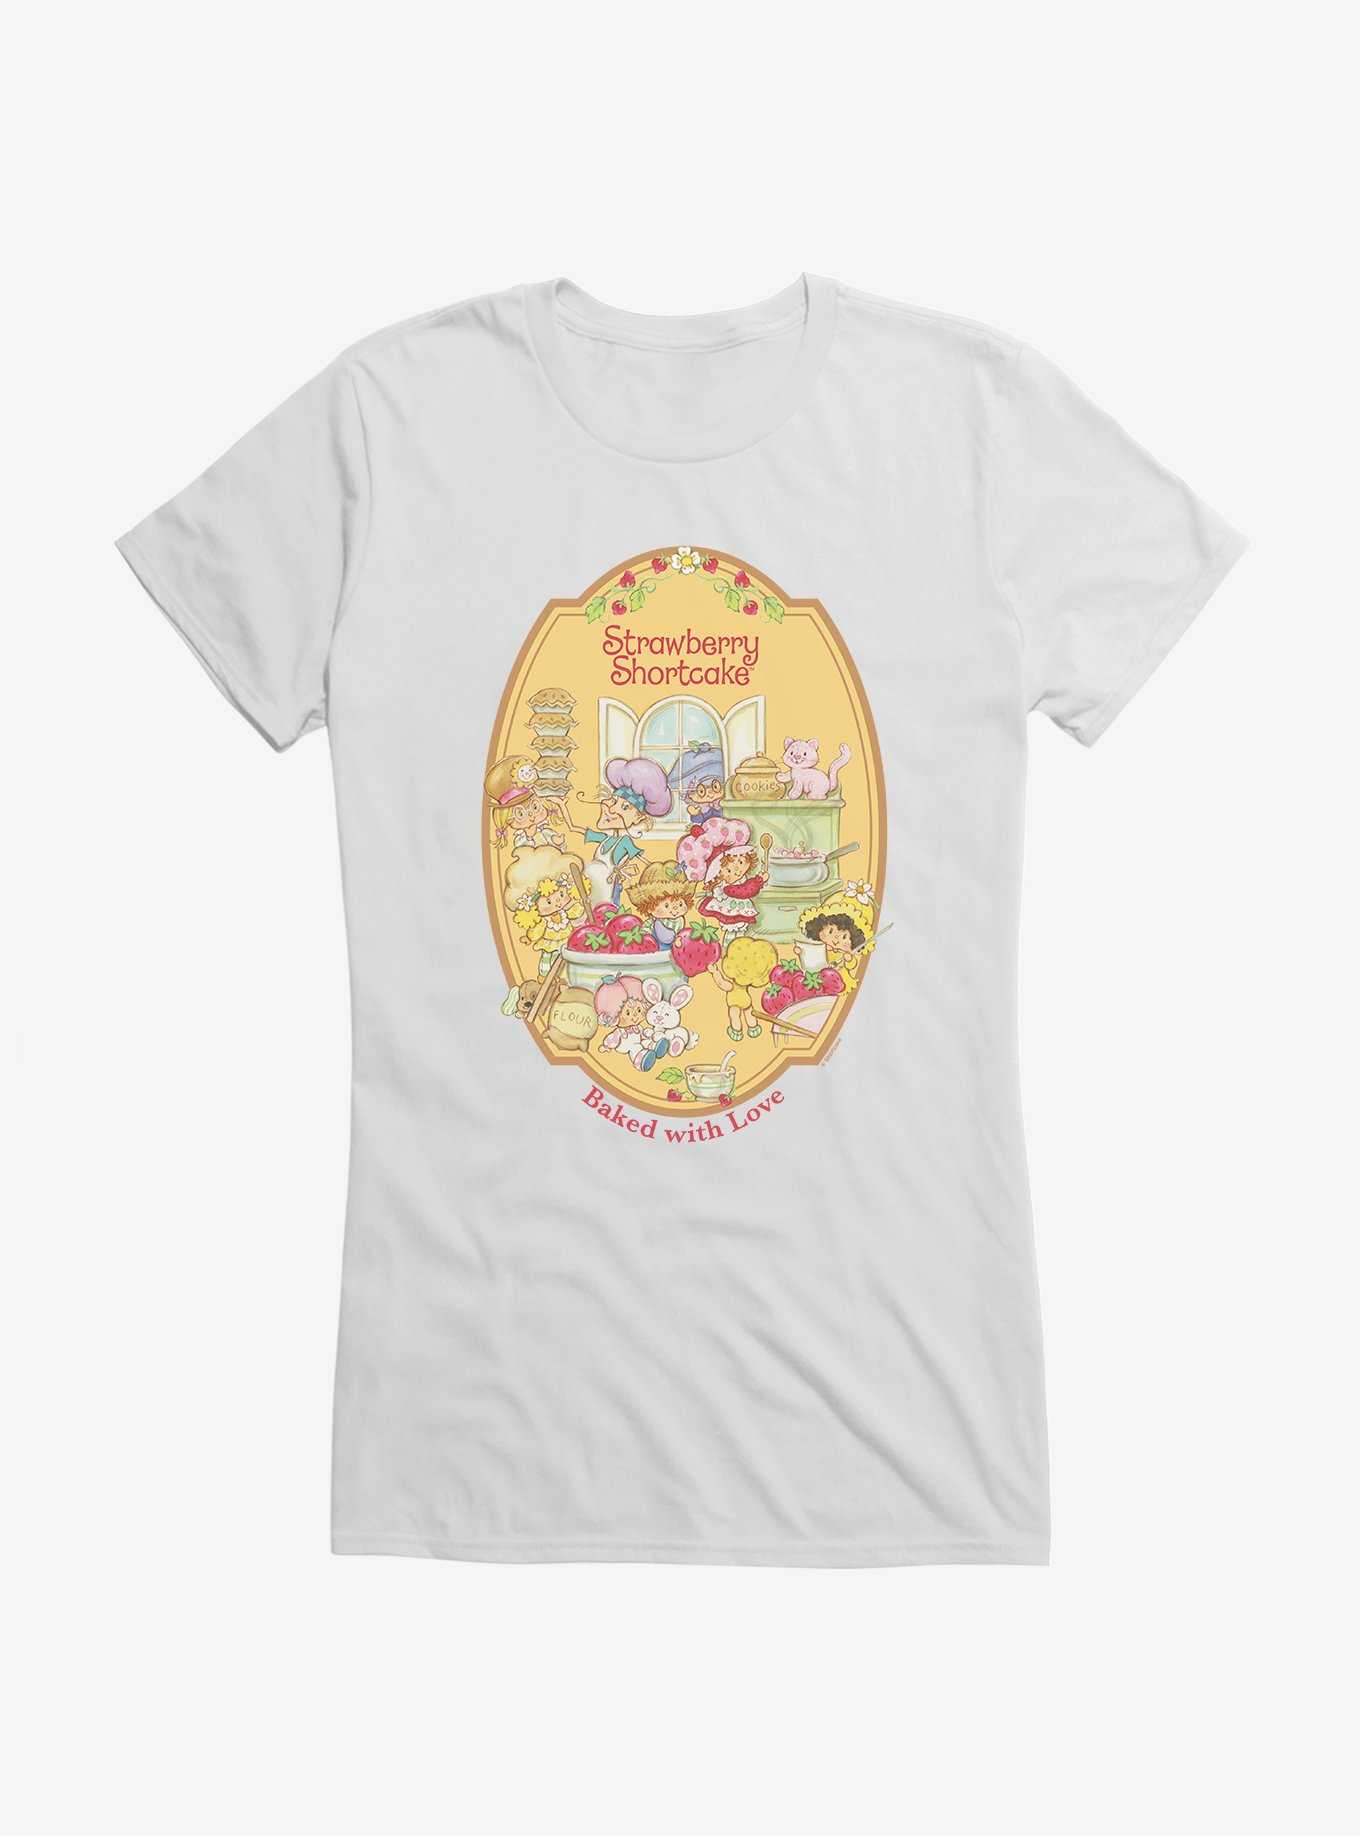 Strawberry Shortcake Baked With Love Girls T-Shirt, , hi-res